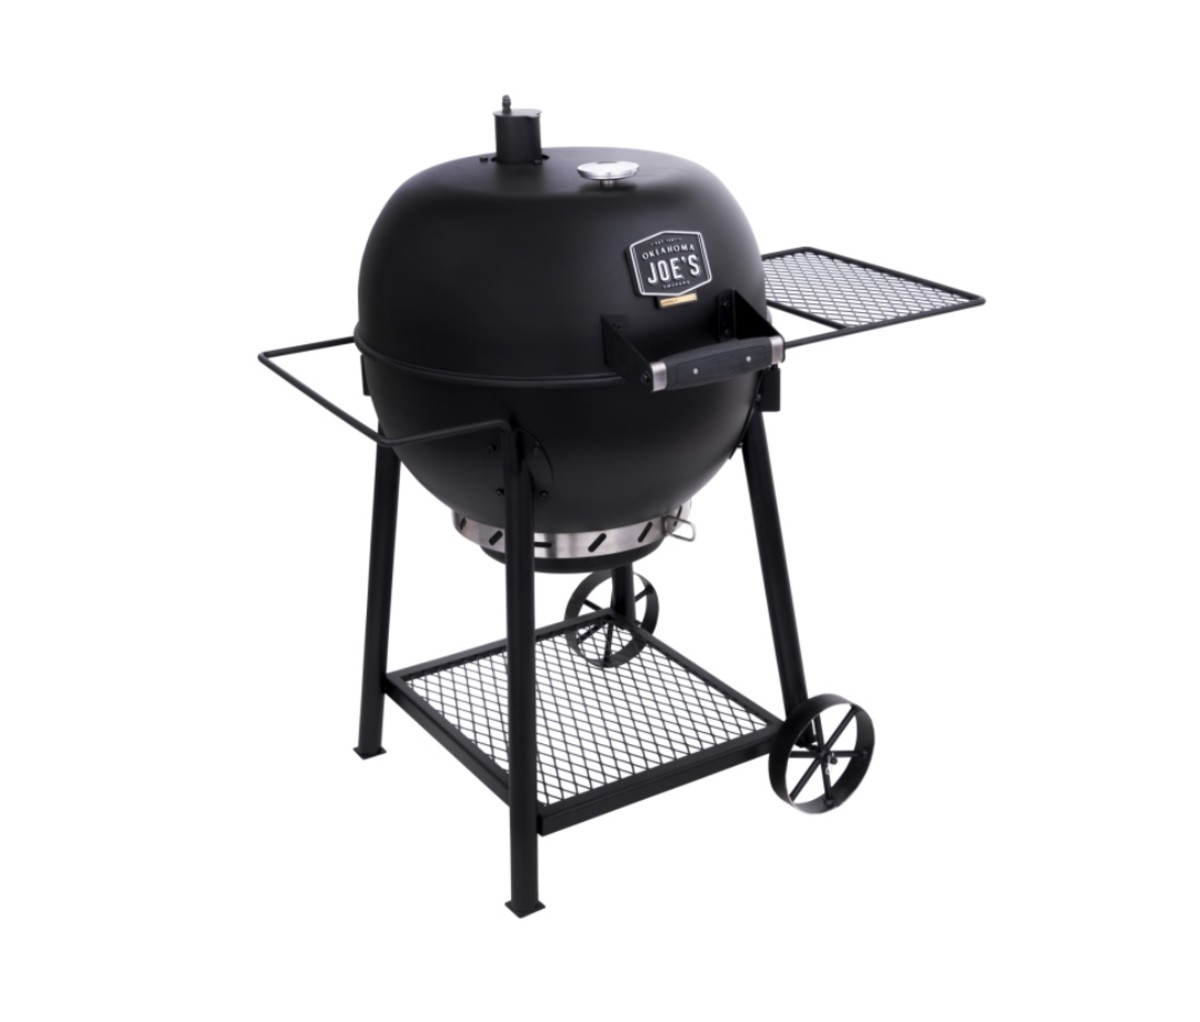 Create charcoal-fueled culinary feats in your backyard with the Oklahoma Joe's Blackjack Kettle Grill.